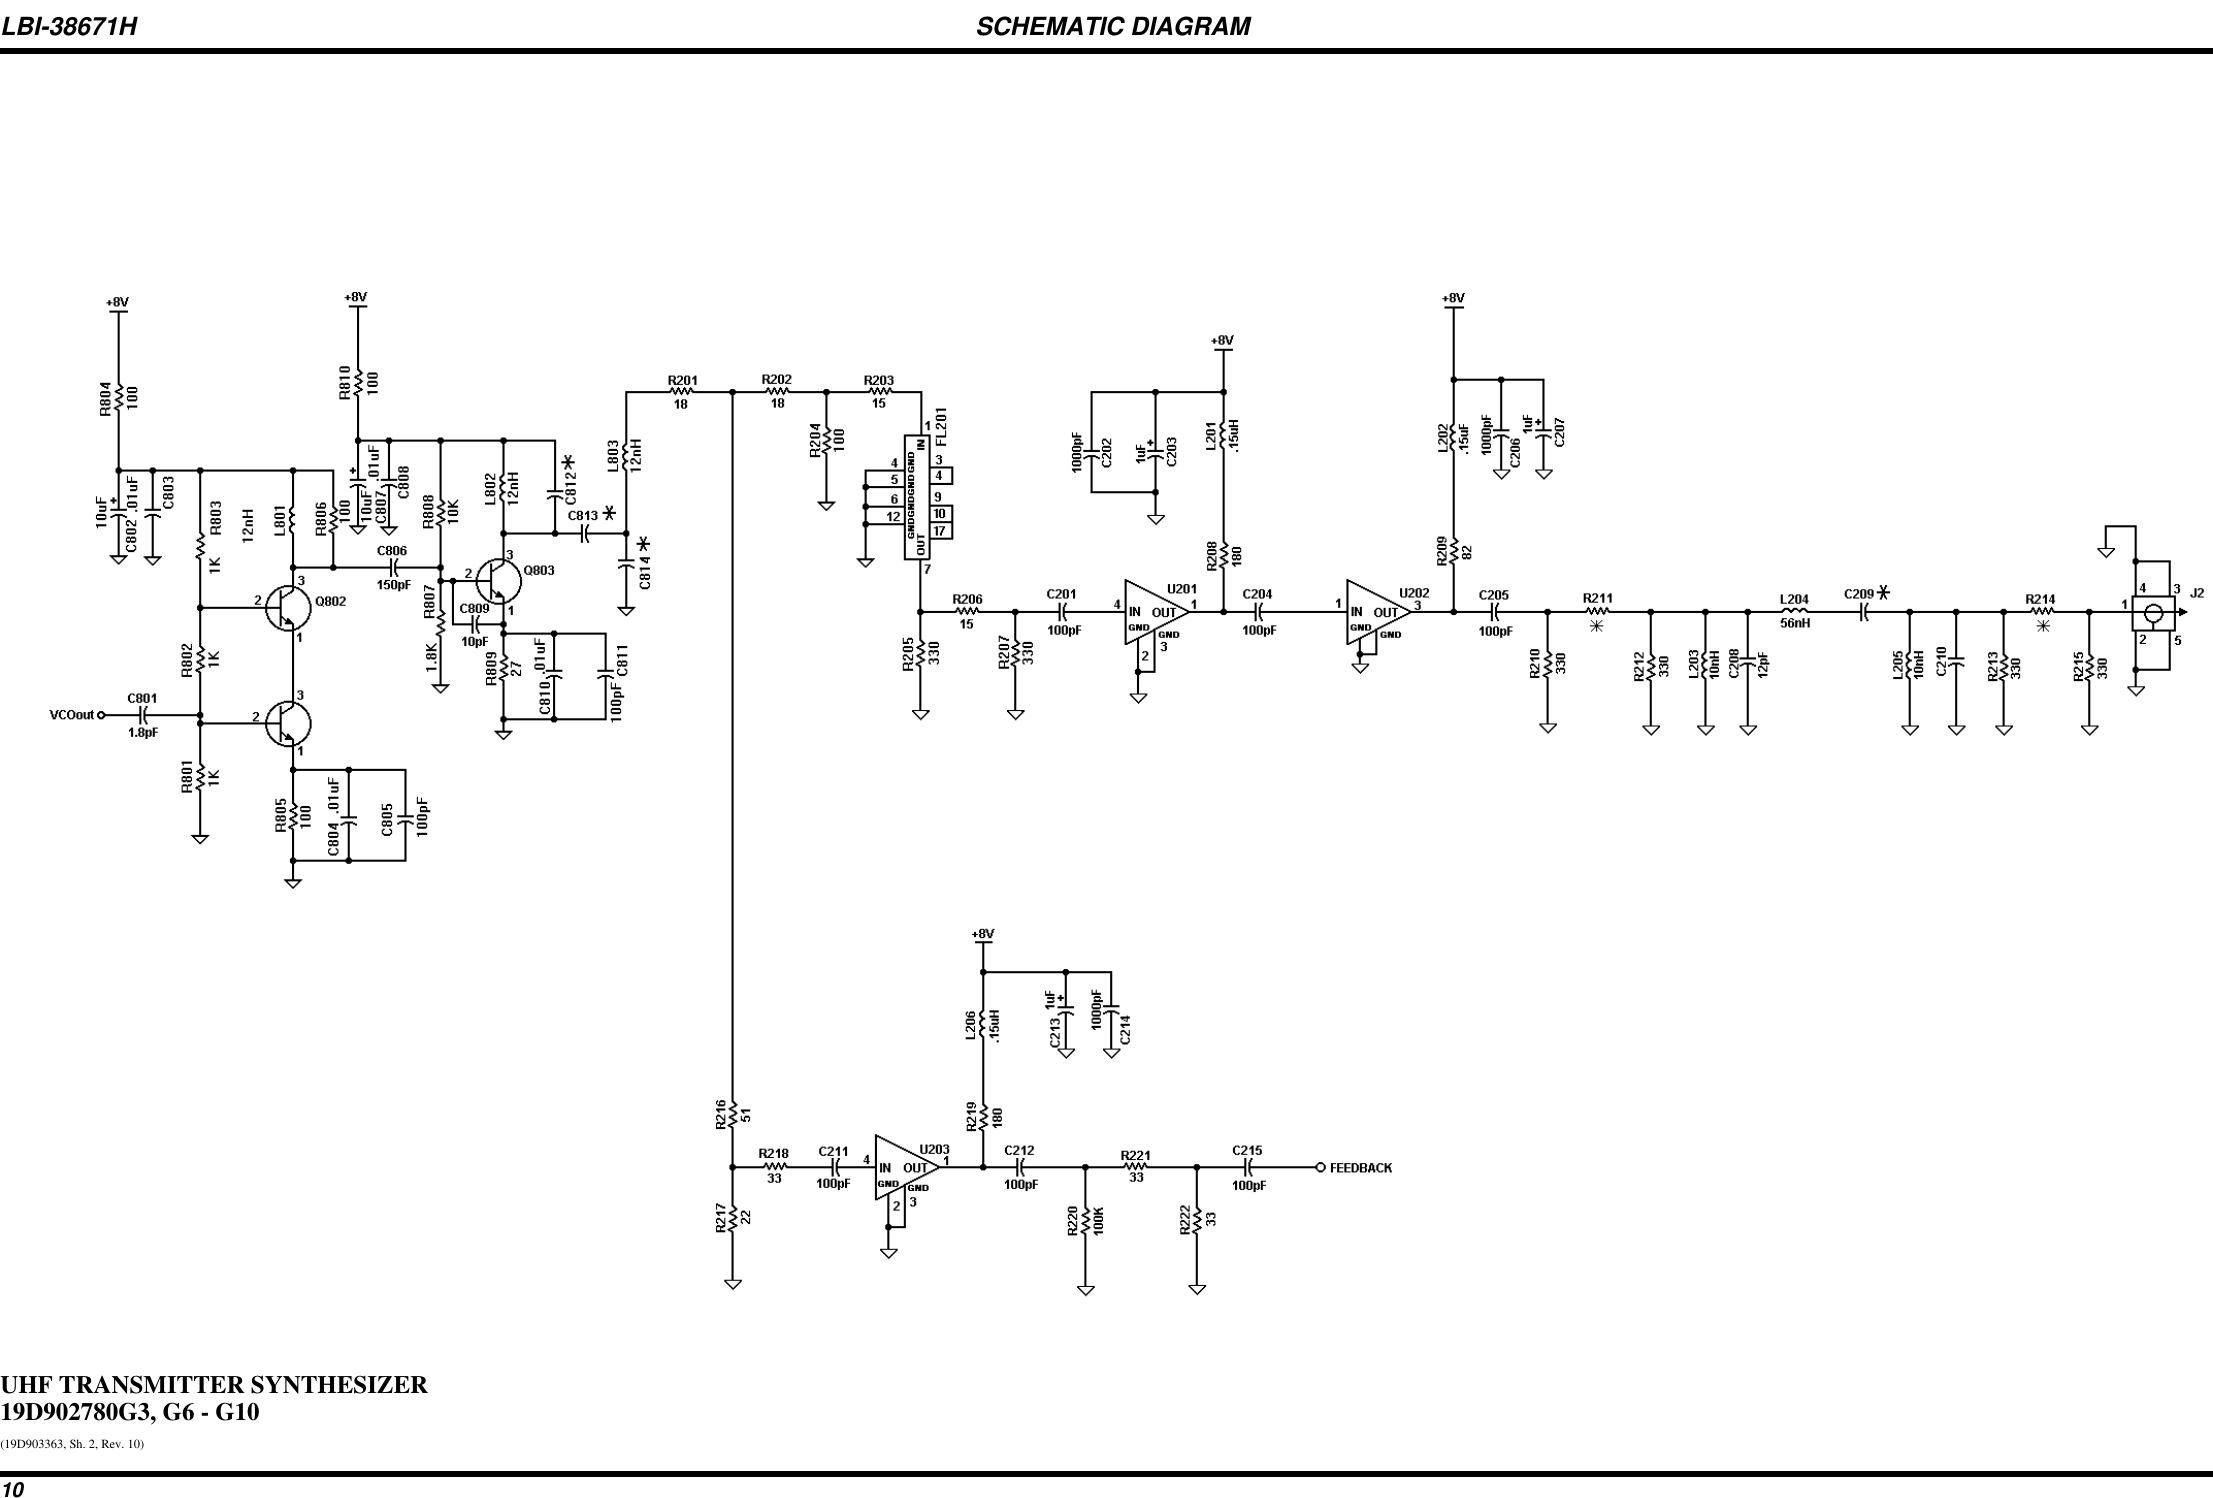 SCHEMATIC DIAGRAMUHF TRANSMITTER SYNTHESIZER19D902780G3, G6 - G10(19D903363, Sh. 2, Rev. 10)LBI-38671H10